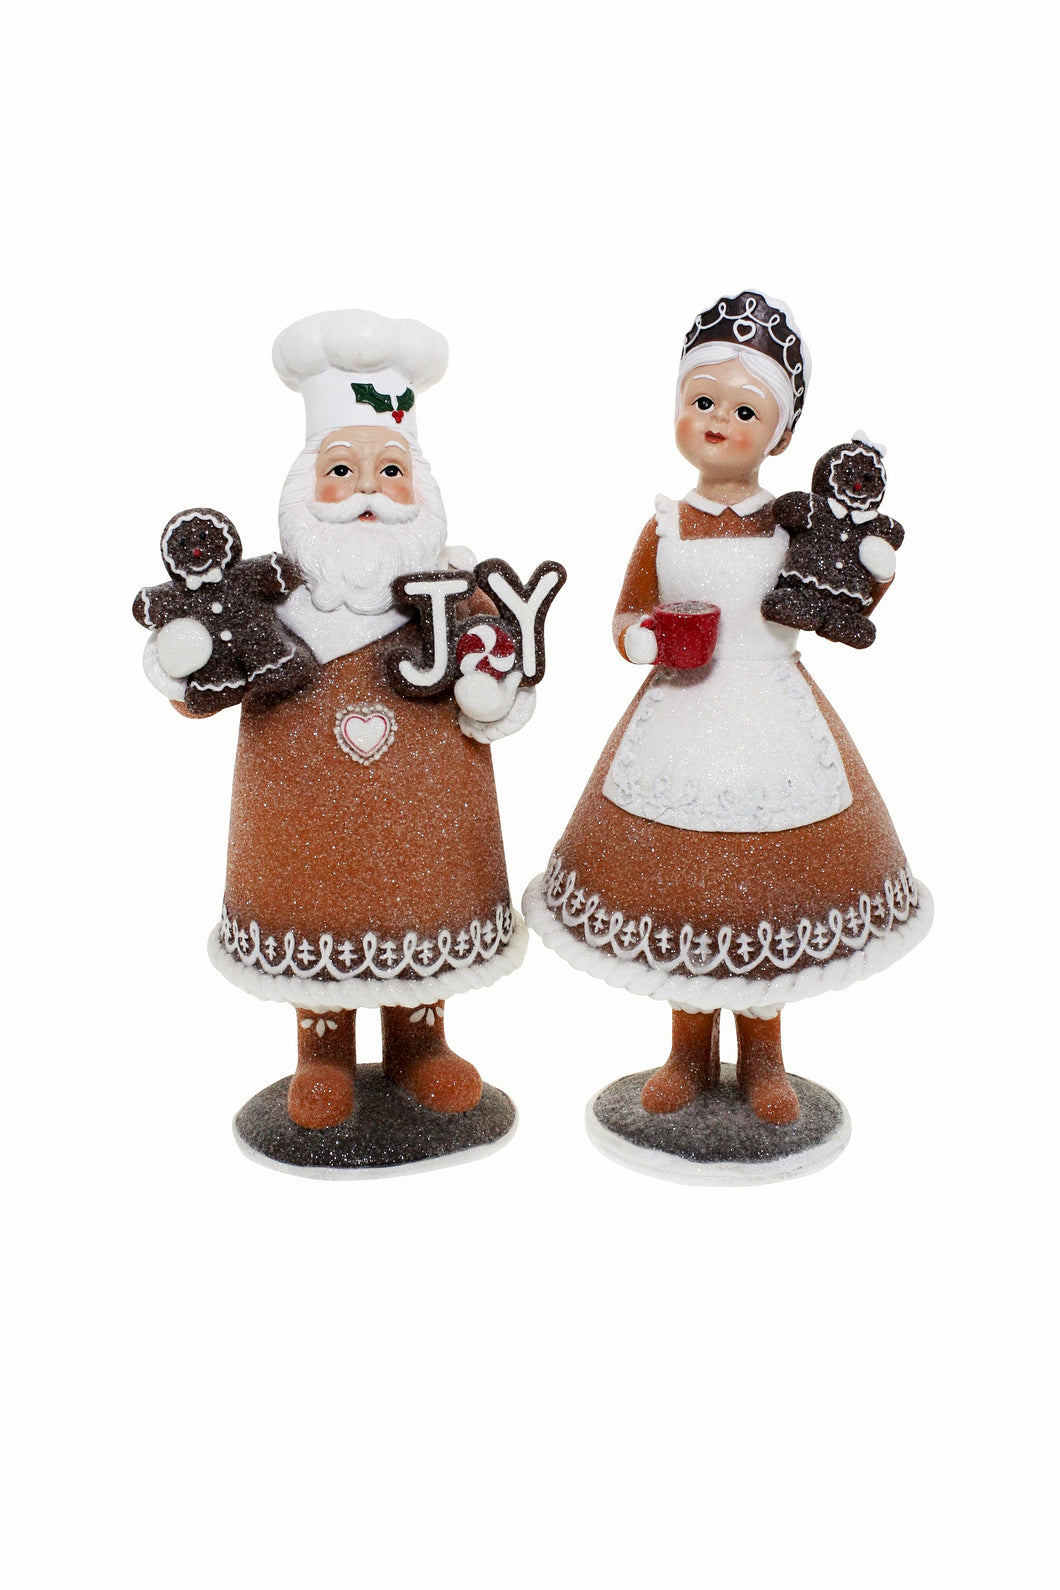 Mr & Mrs Claus Gingerbread